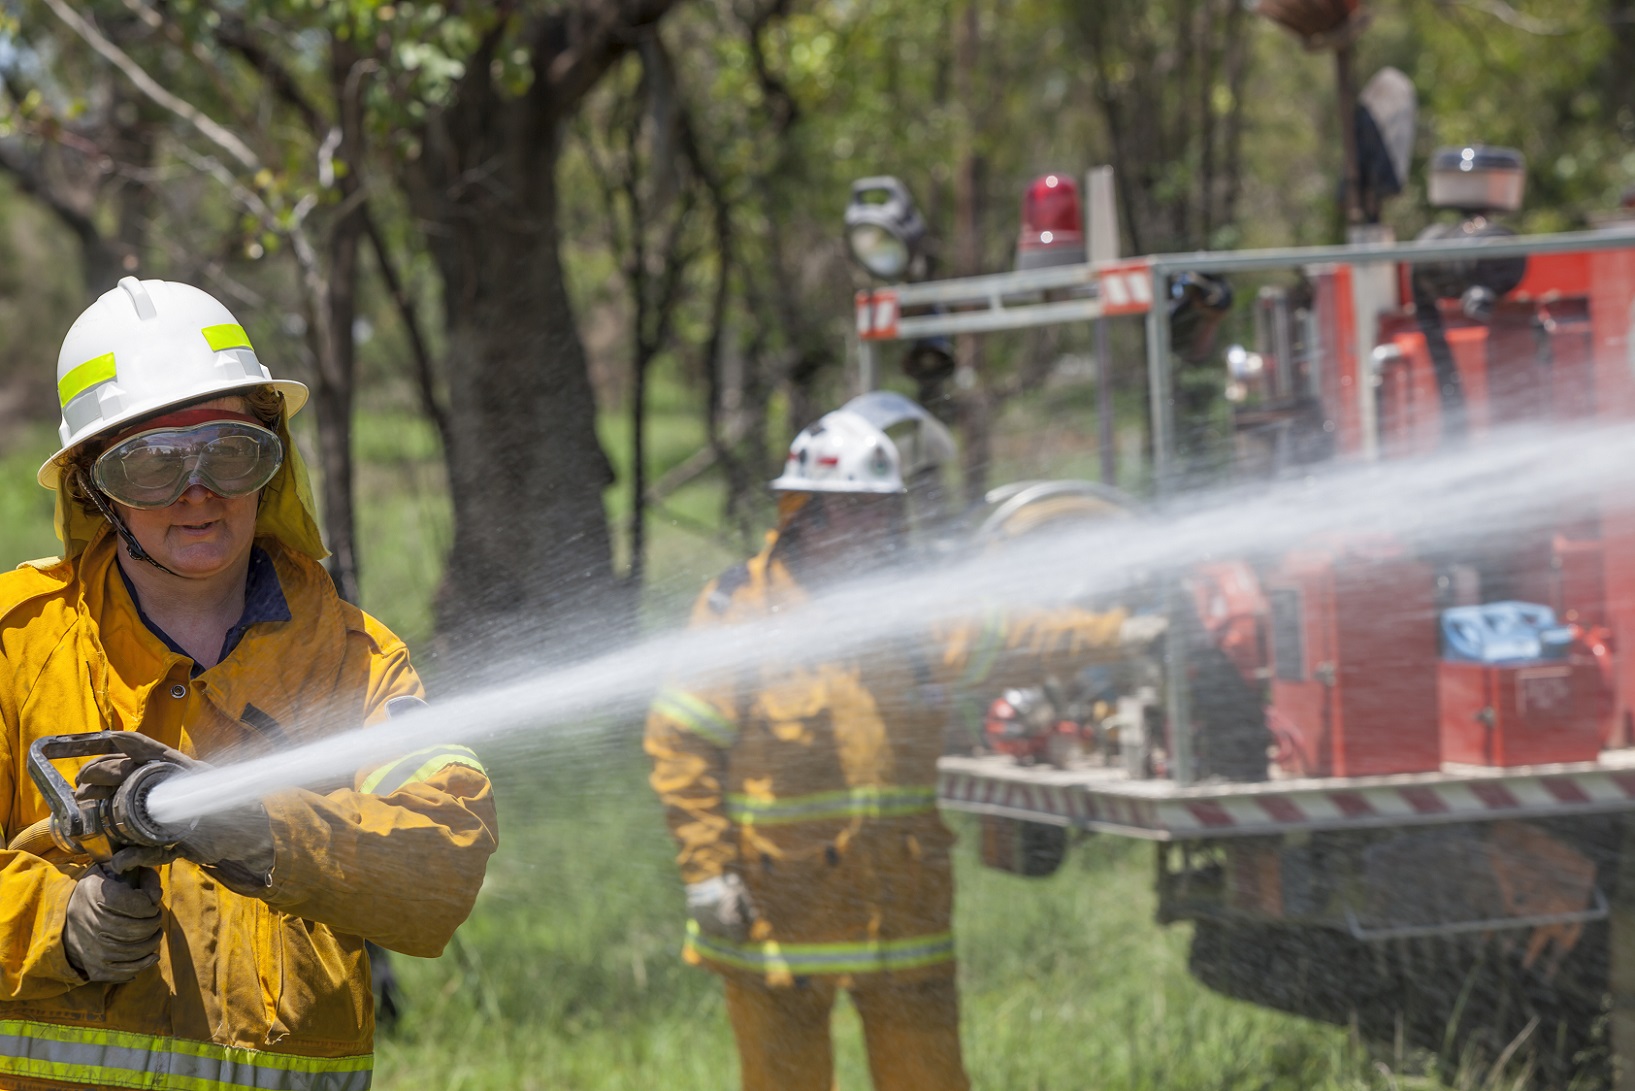 A female rural fire fighter with hose and fire truck. She is dressed in protective clothing.